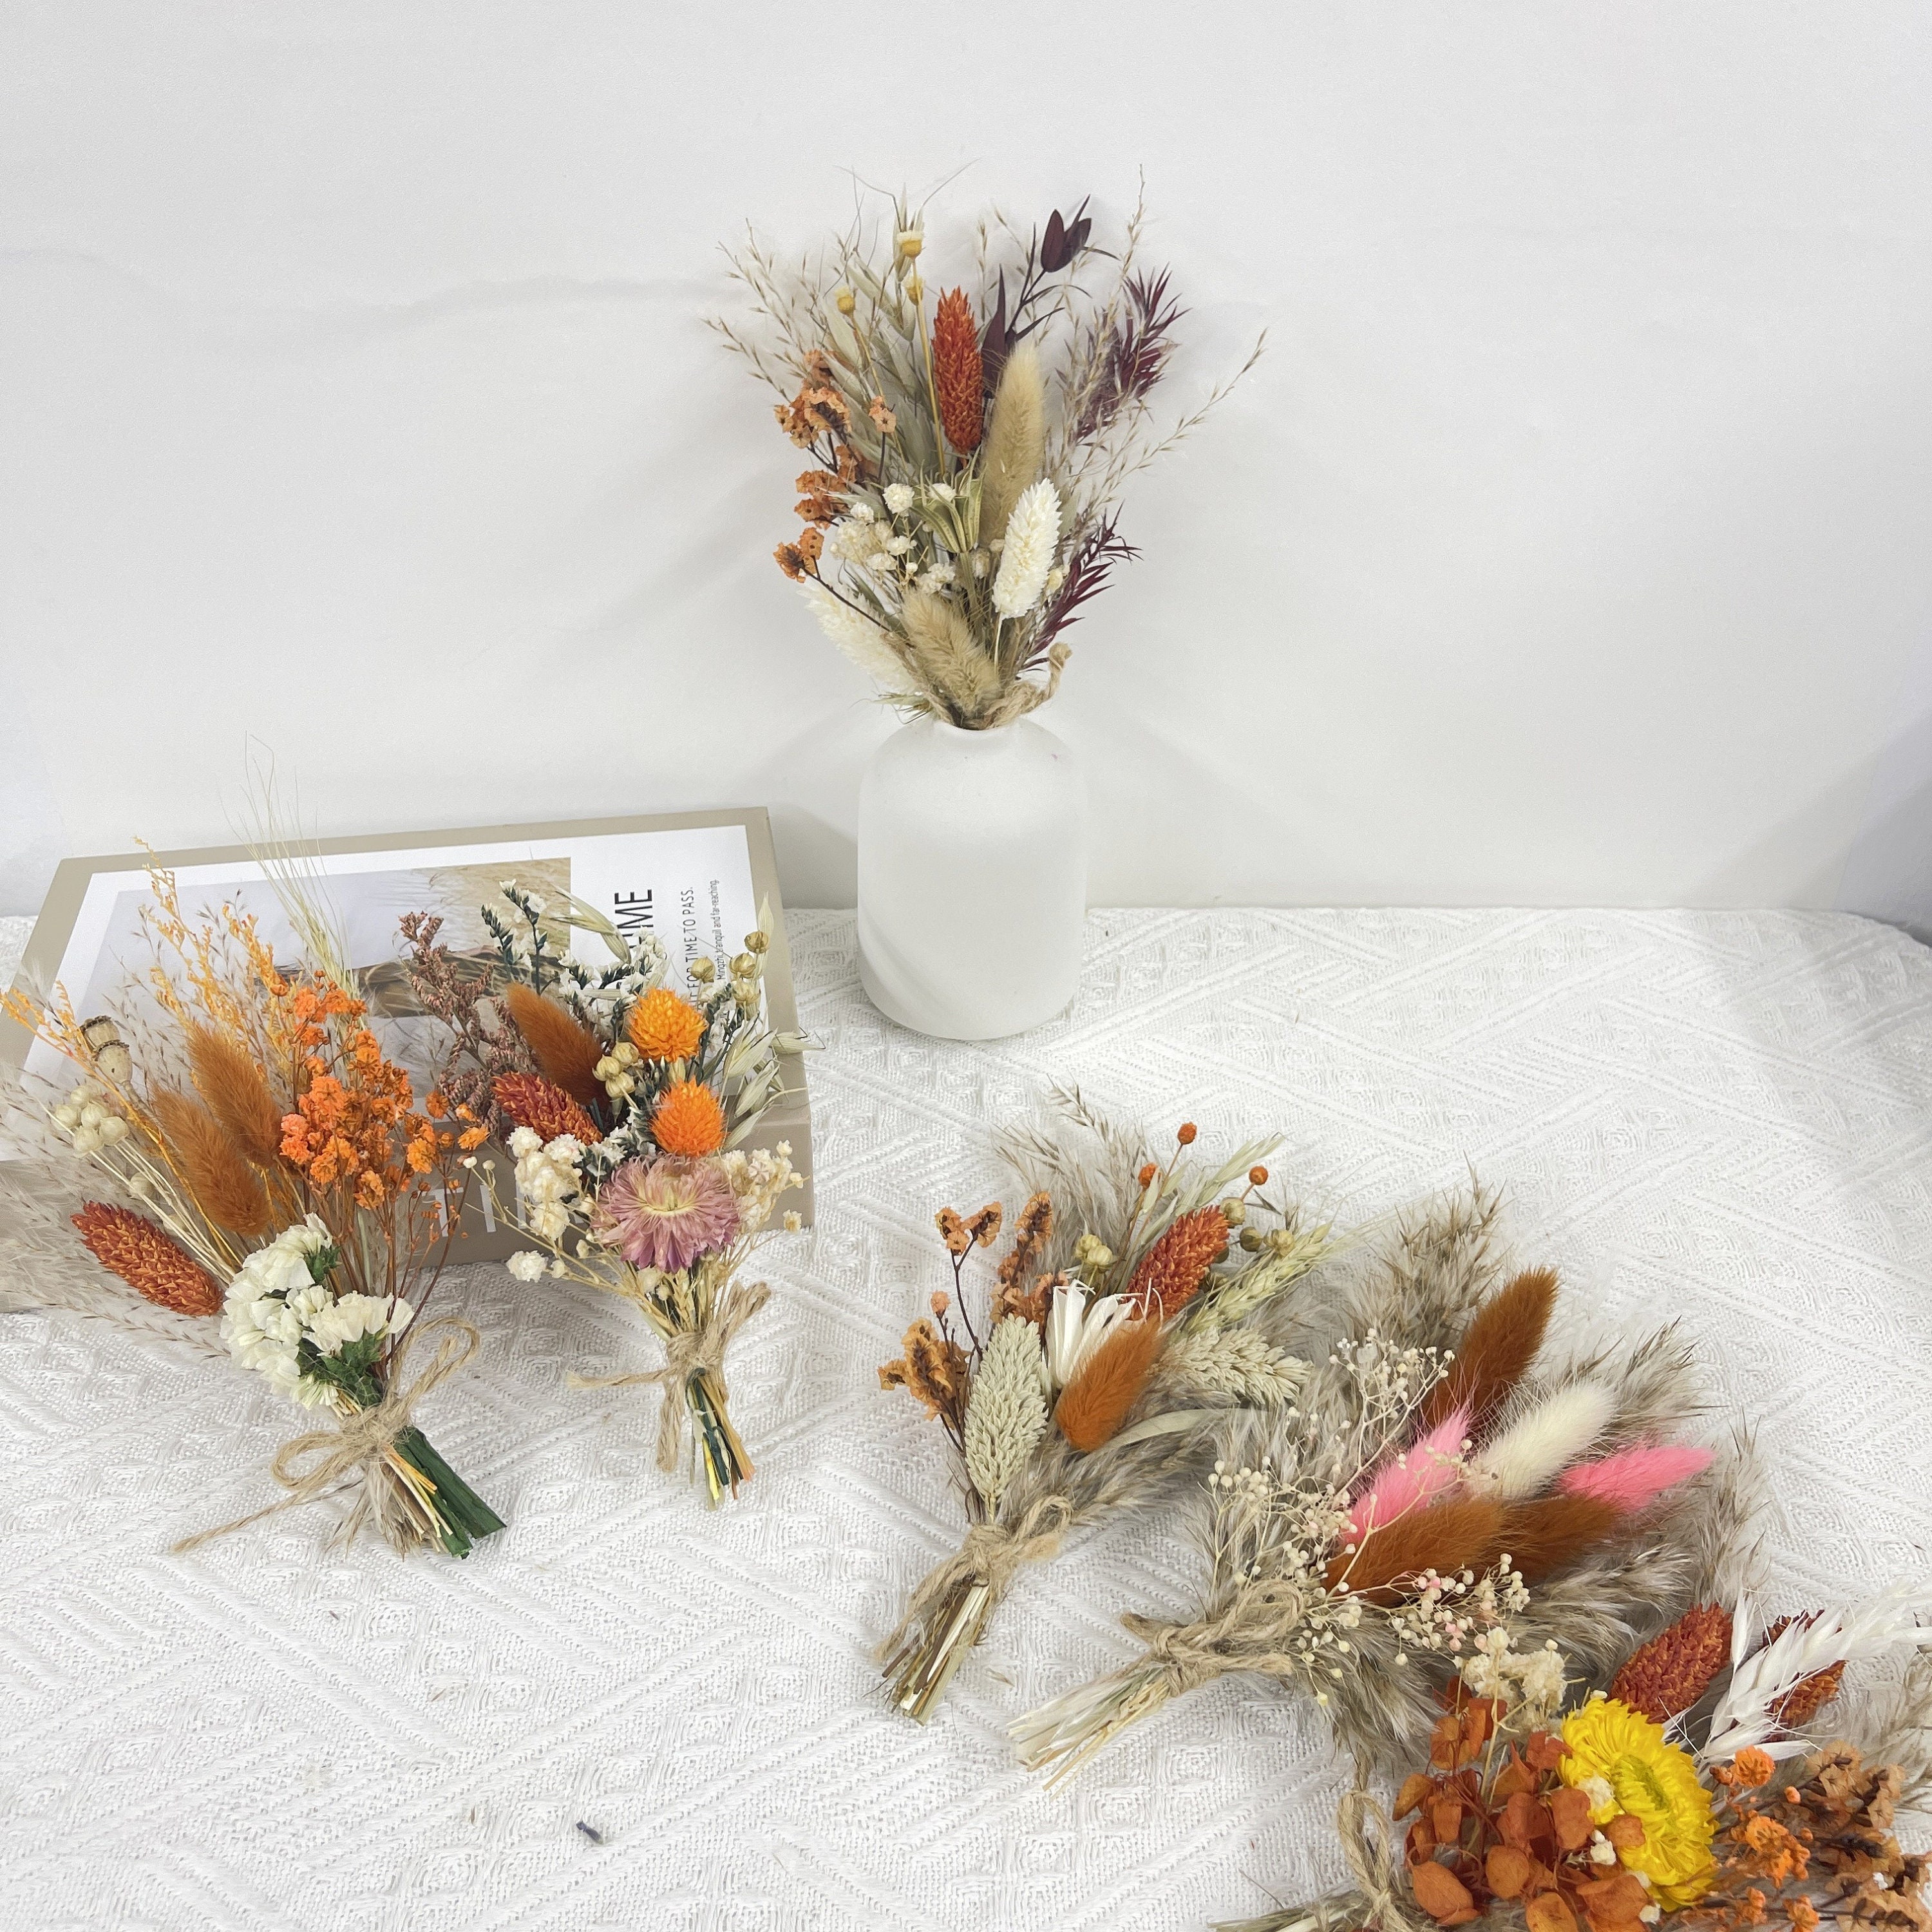 DIY - Easy Mini Bouquet from Dried Flowers in 5 minutes